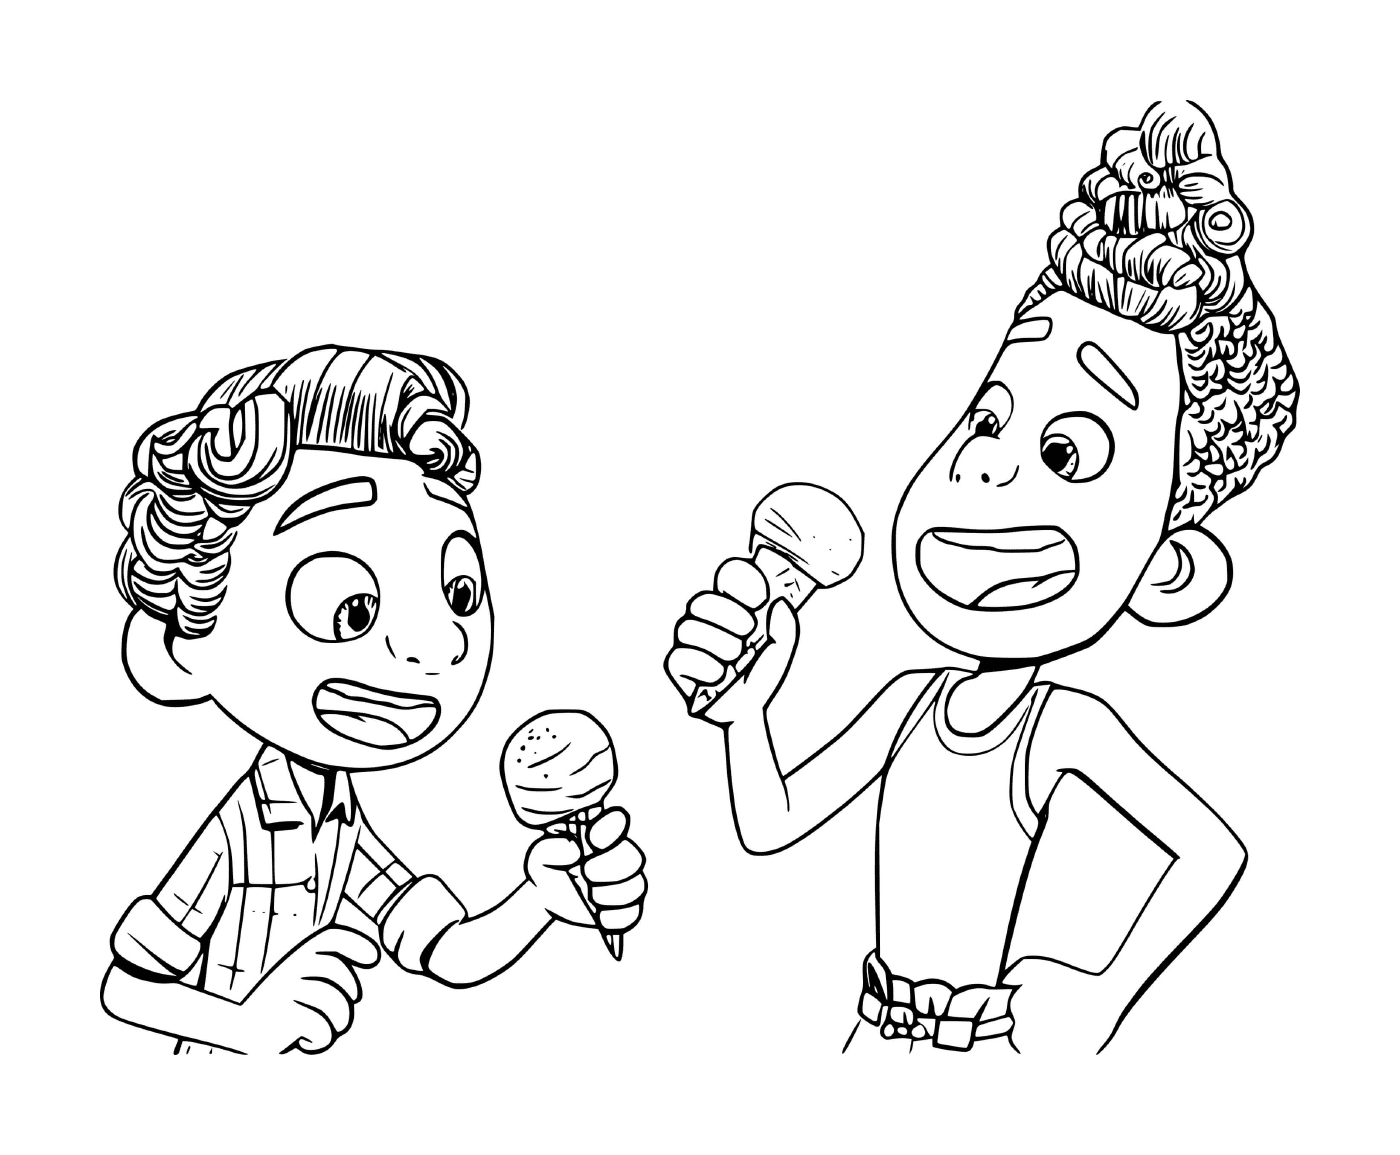  Two people eating ice cream 